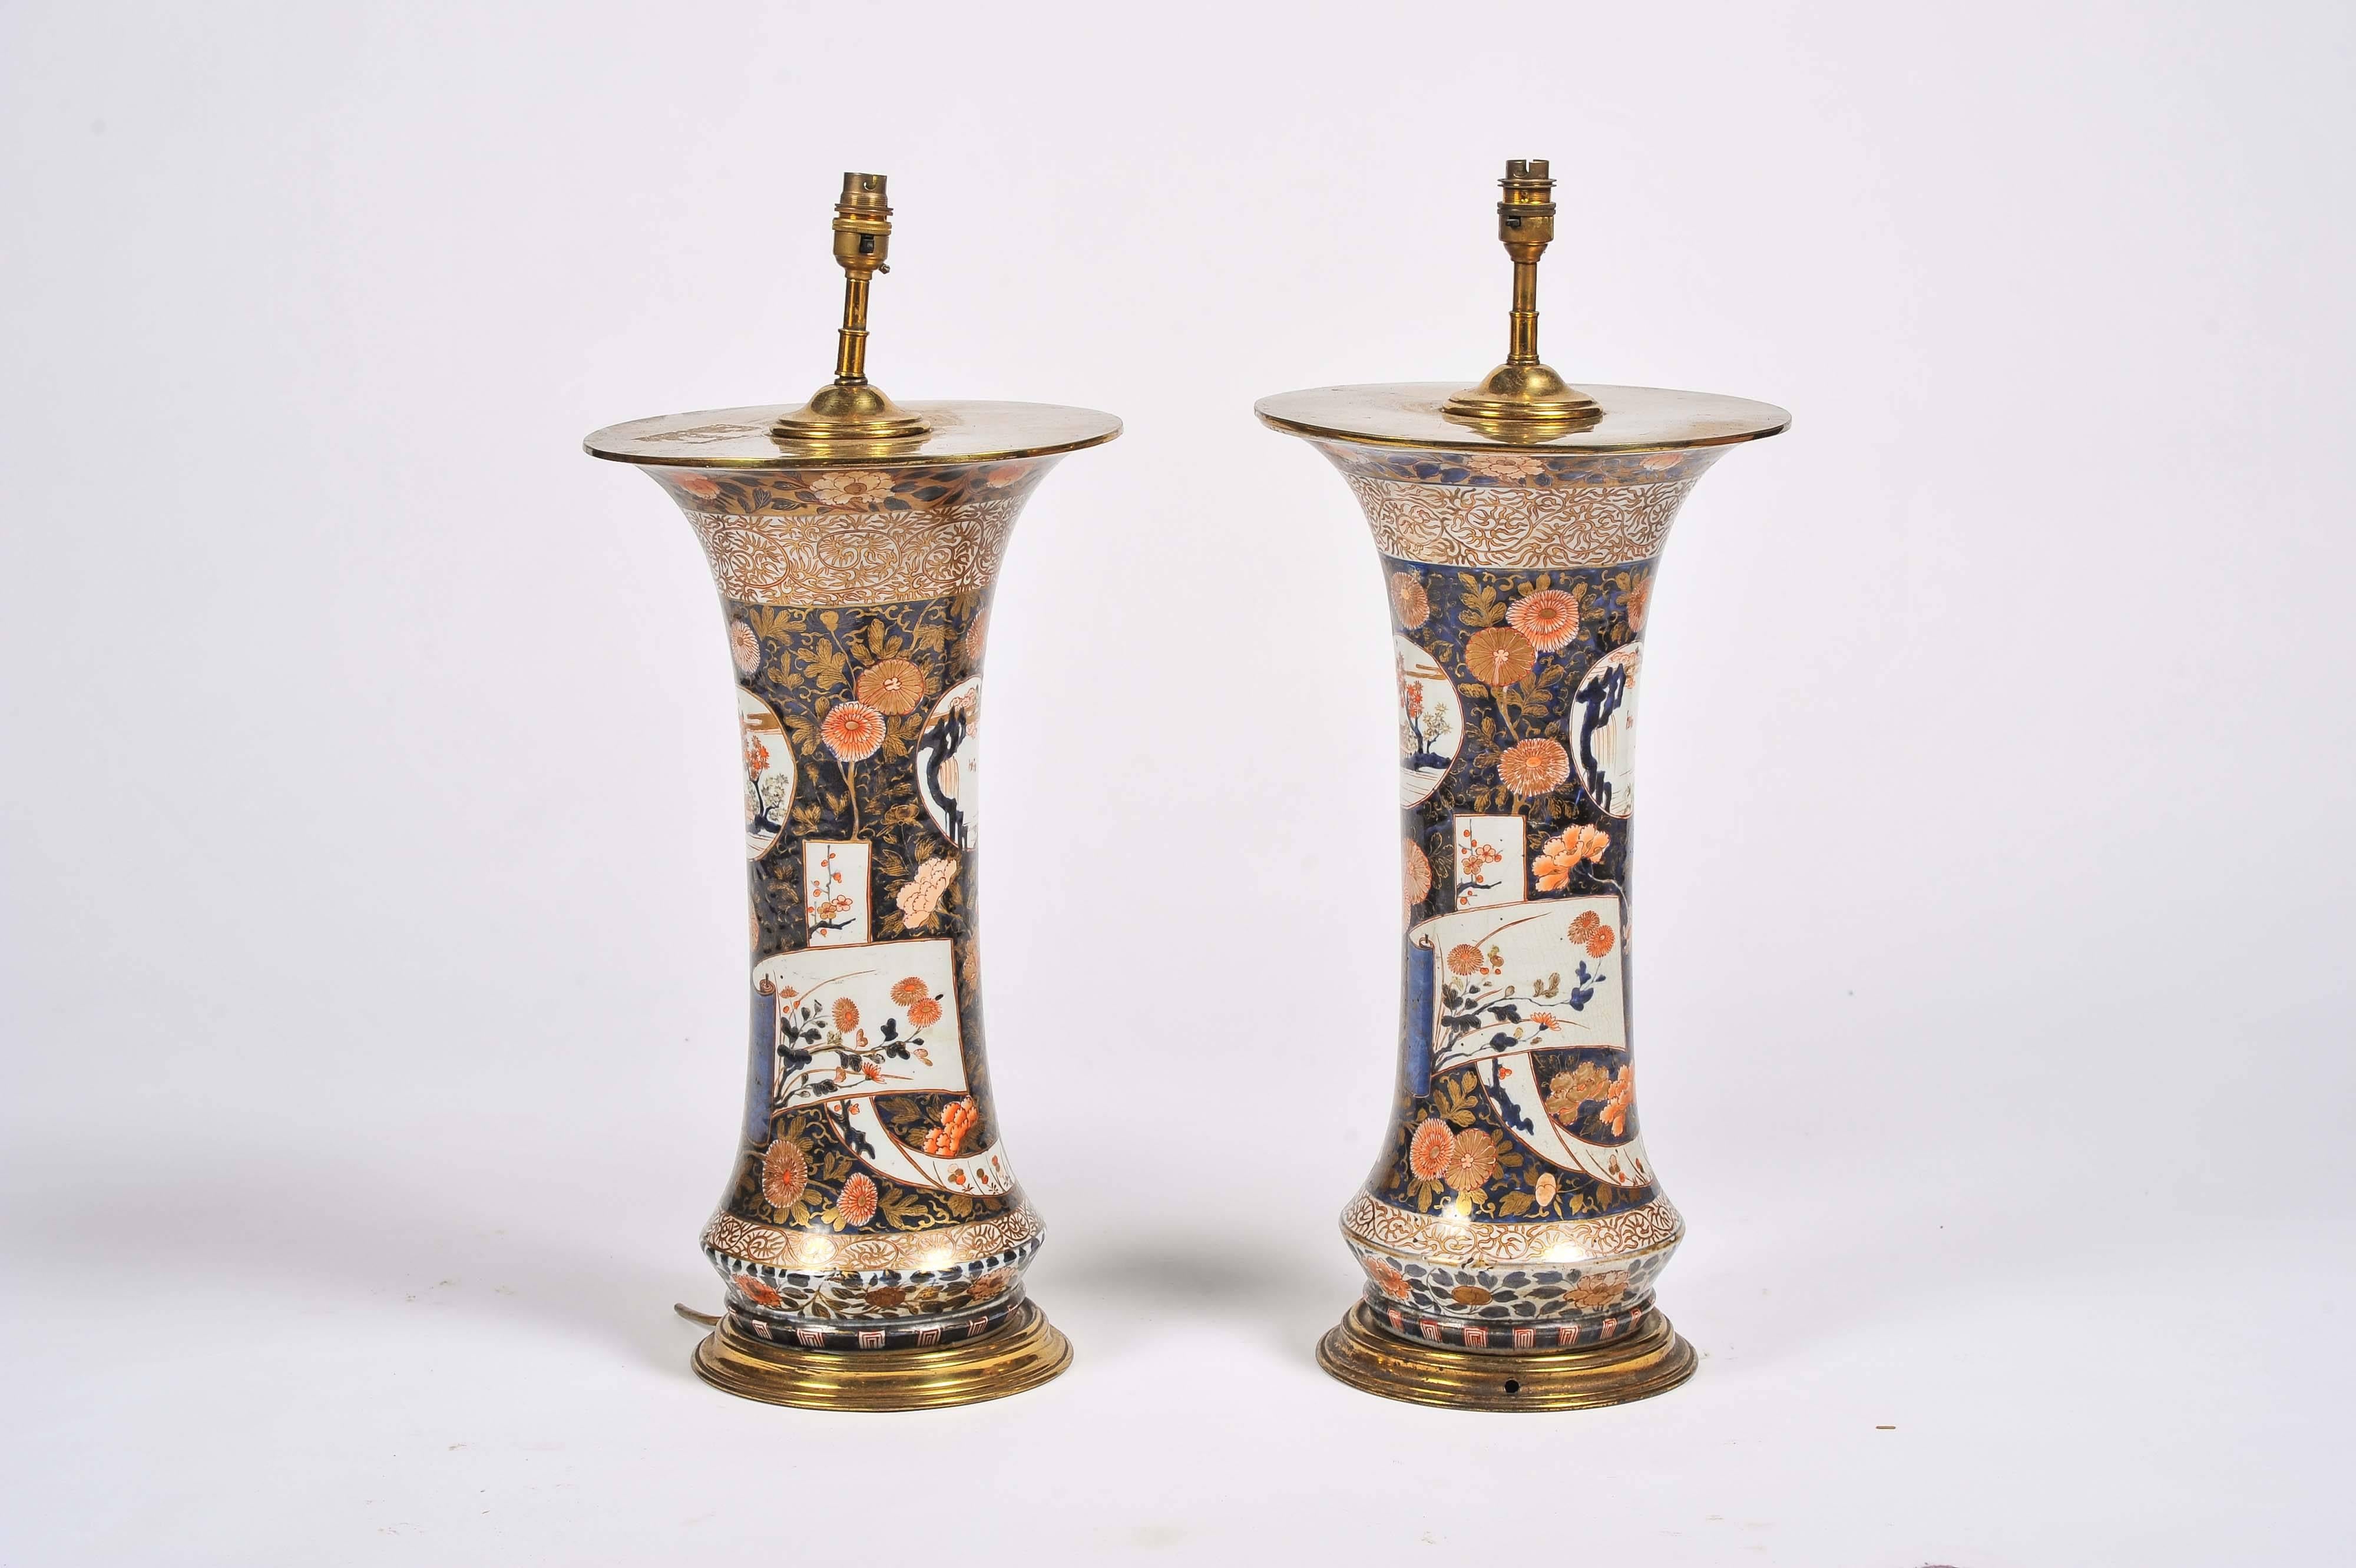 Hand-Painted Large Pair of 18th Century Japanese Arita Vases/Lamps